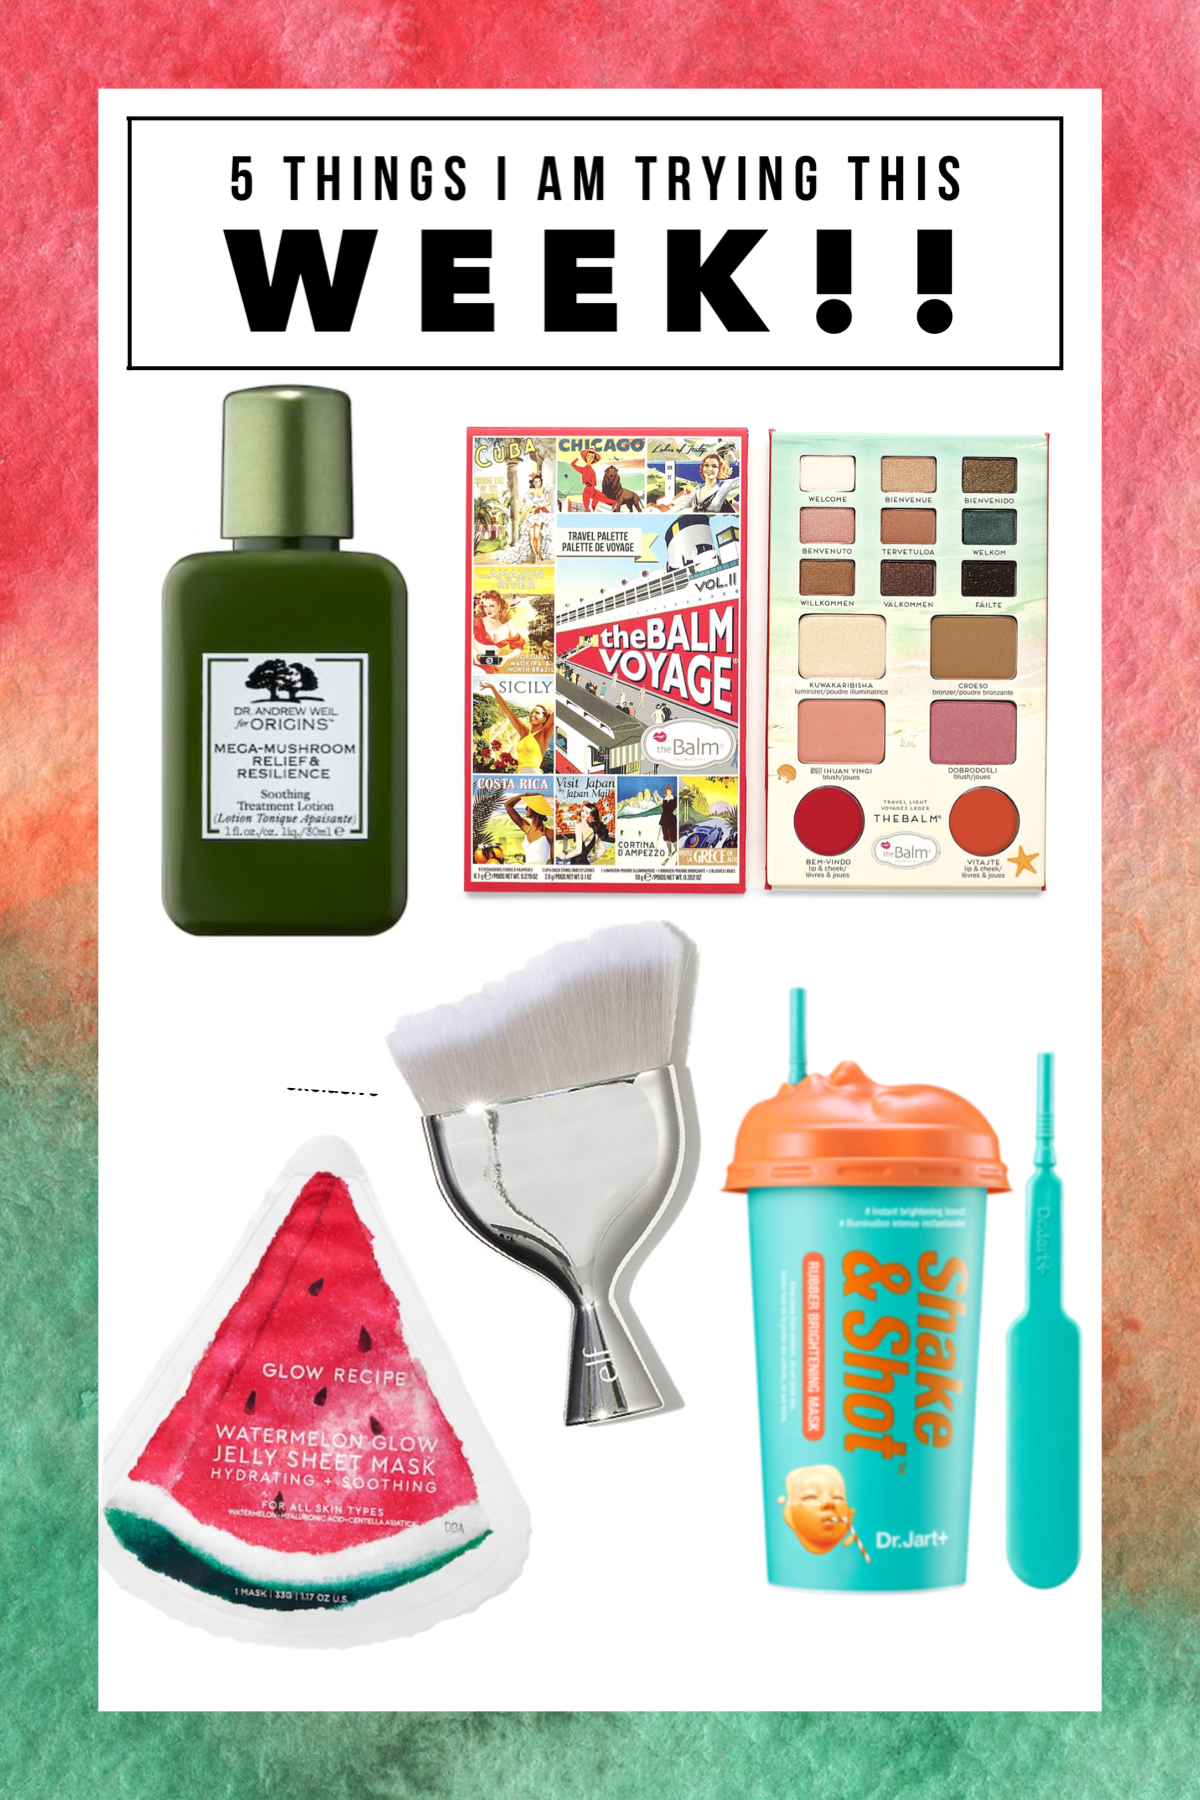 5 New Things I am Trying This Month – Glow Recipe, Origins, Elf, Dr. Jart, and The Balm!!